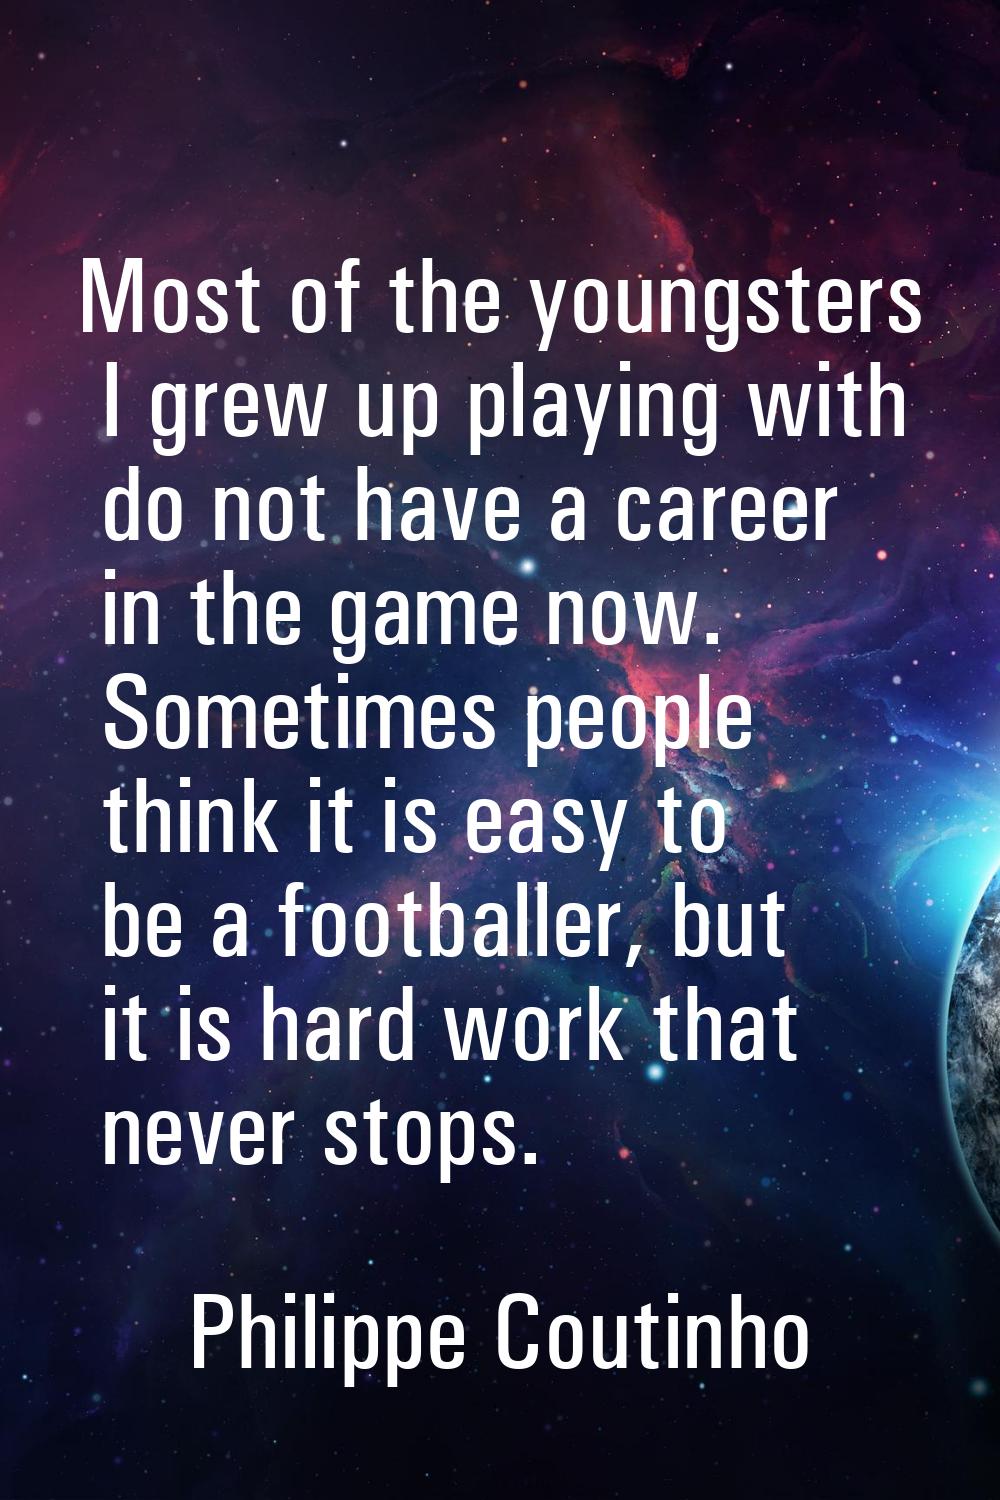 Most of the youngsters I grew up playing with do not have a career in the game now. Sometimes peopl